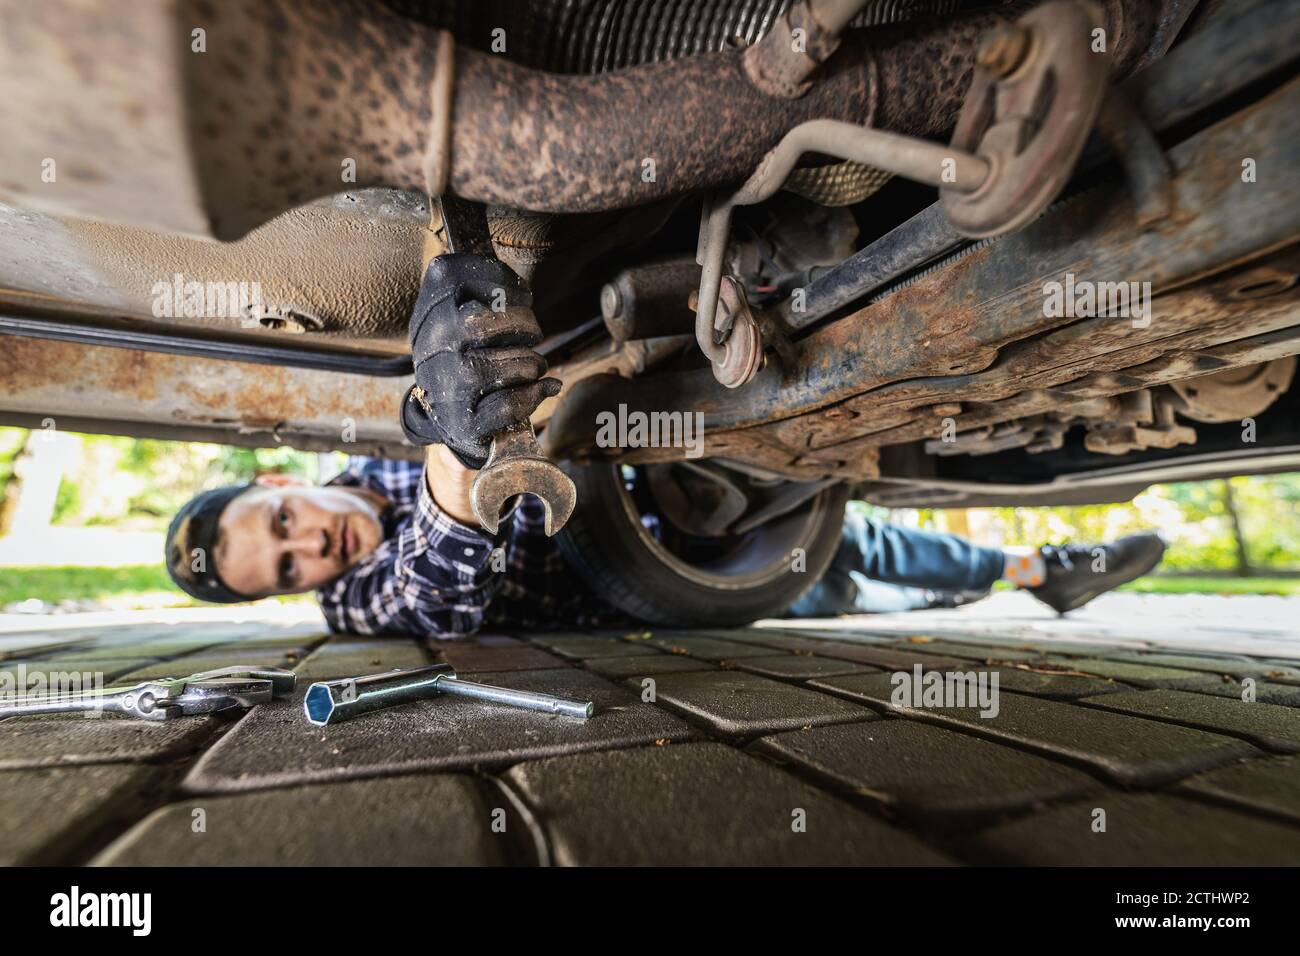 man laying on the ground under the car and repairing engine with wrench Stock Photo